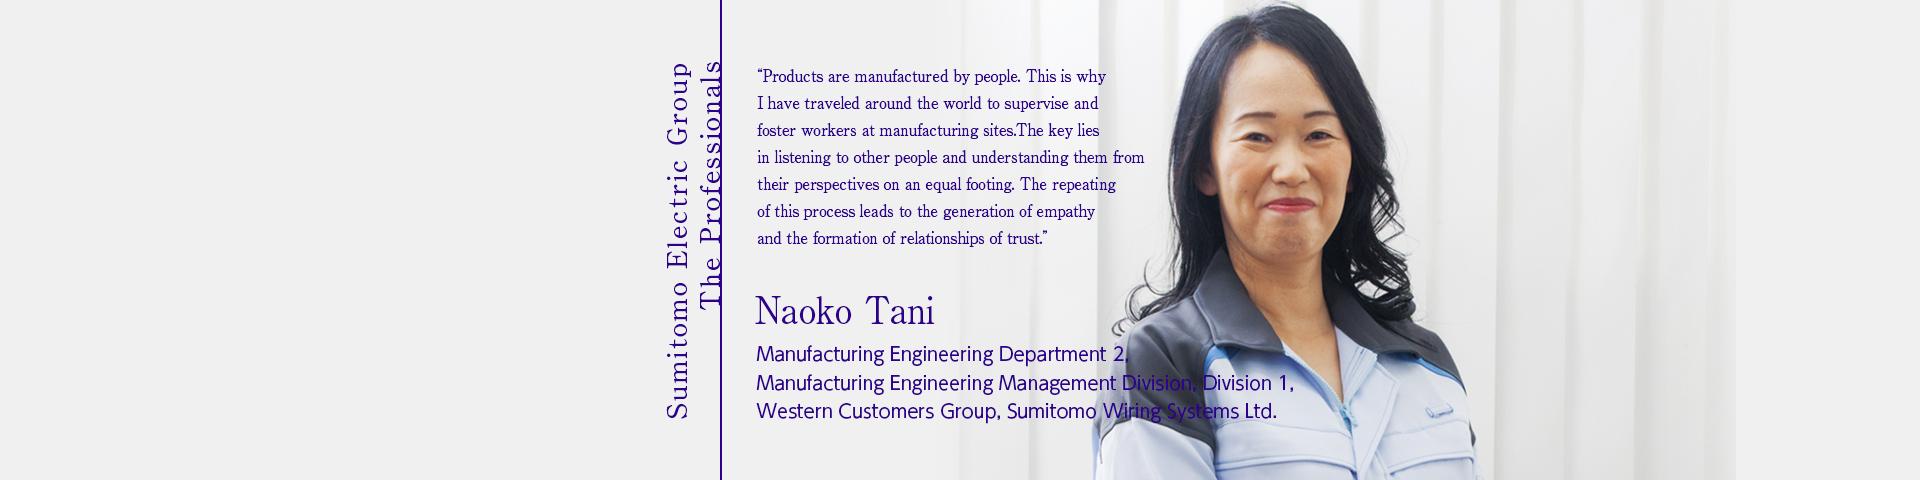 Sumitomo Electric Group The Professionals ~Naoko Tani Manufacturing Engineering Department 2, Manufacturing Engineering Management Division, Division 1, Western Customers Group, Sumitomo Wiring Systems Ltd.~ 